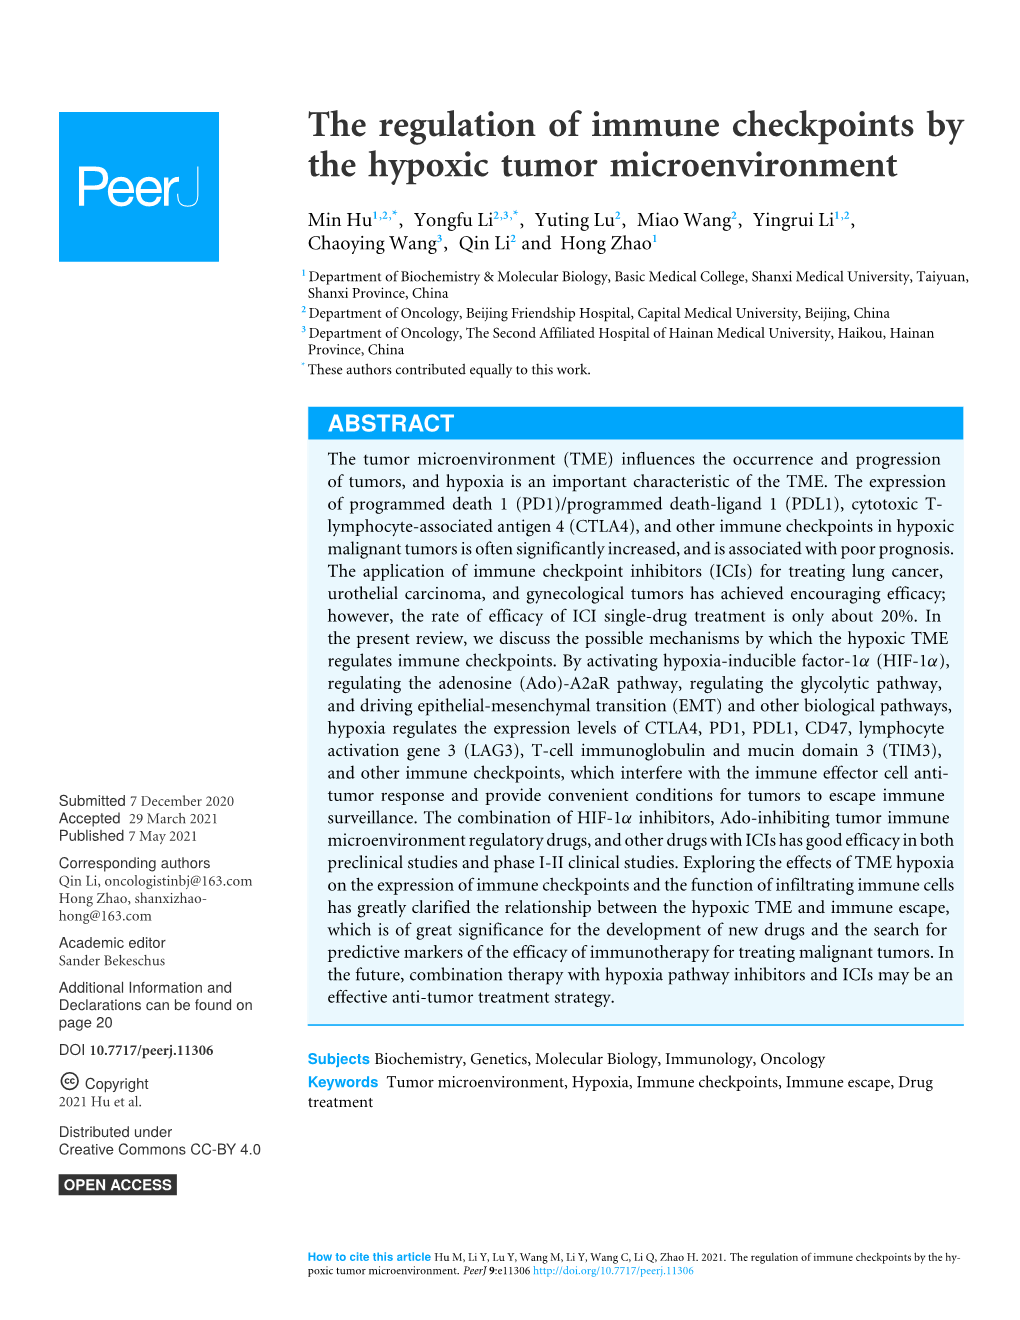 The Regulation of Immune Checkpoints by the Hypoxic Tumor Microenvironment